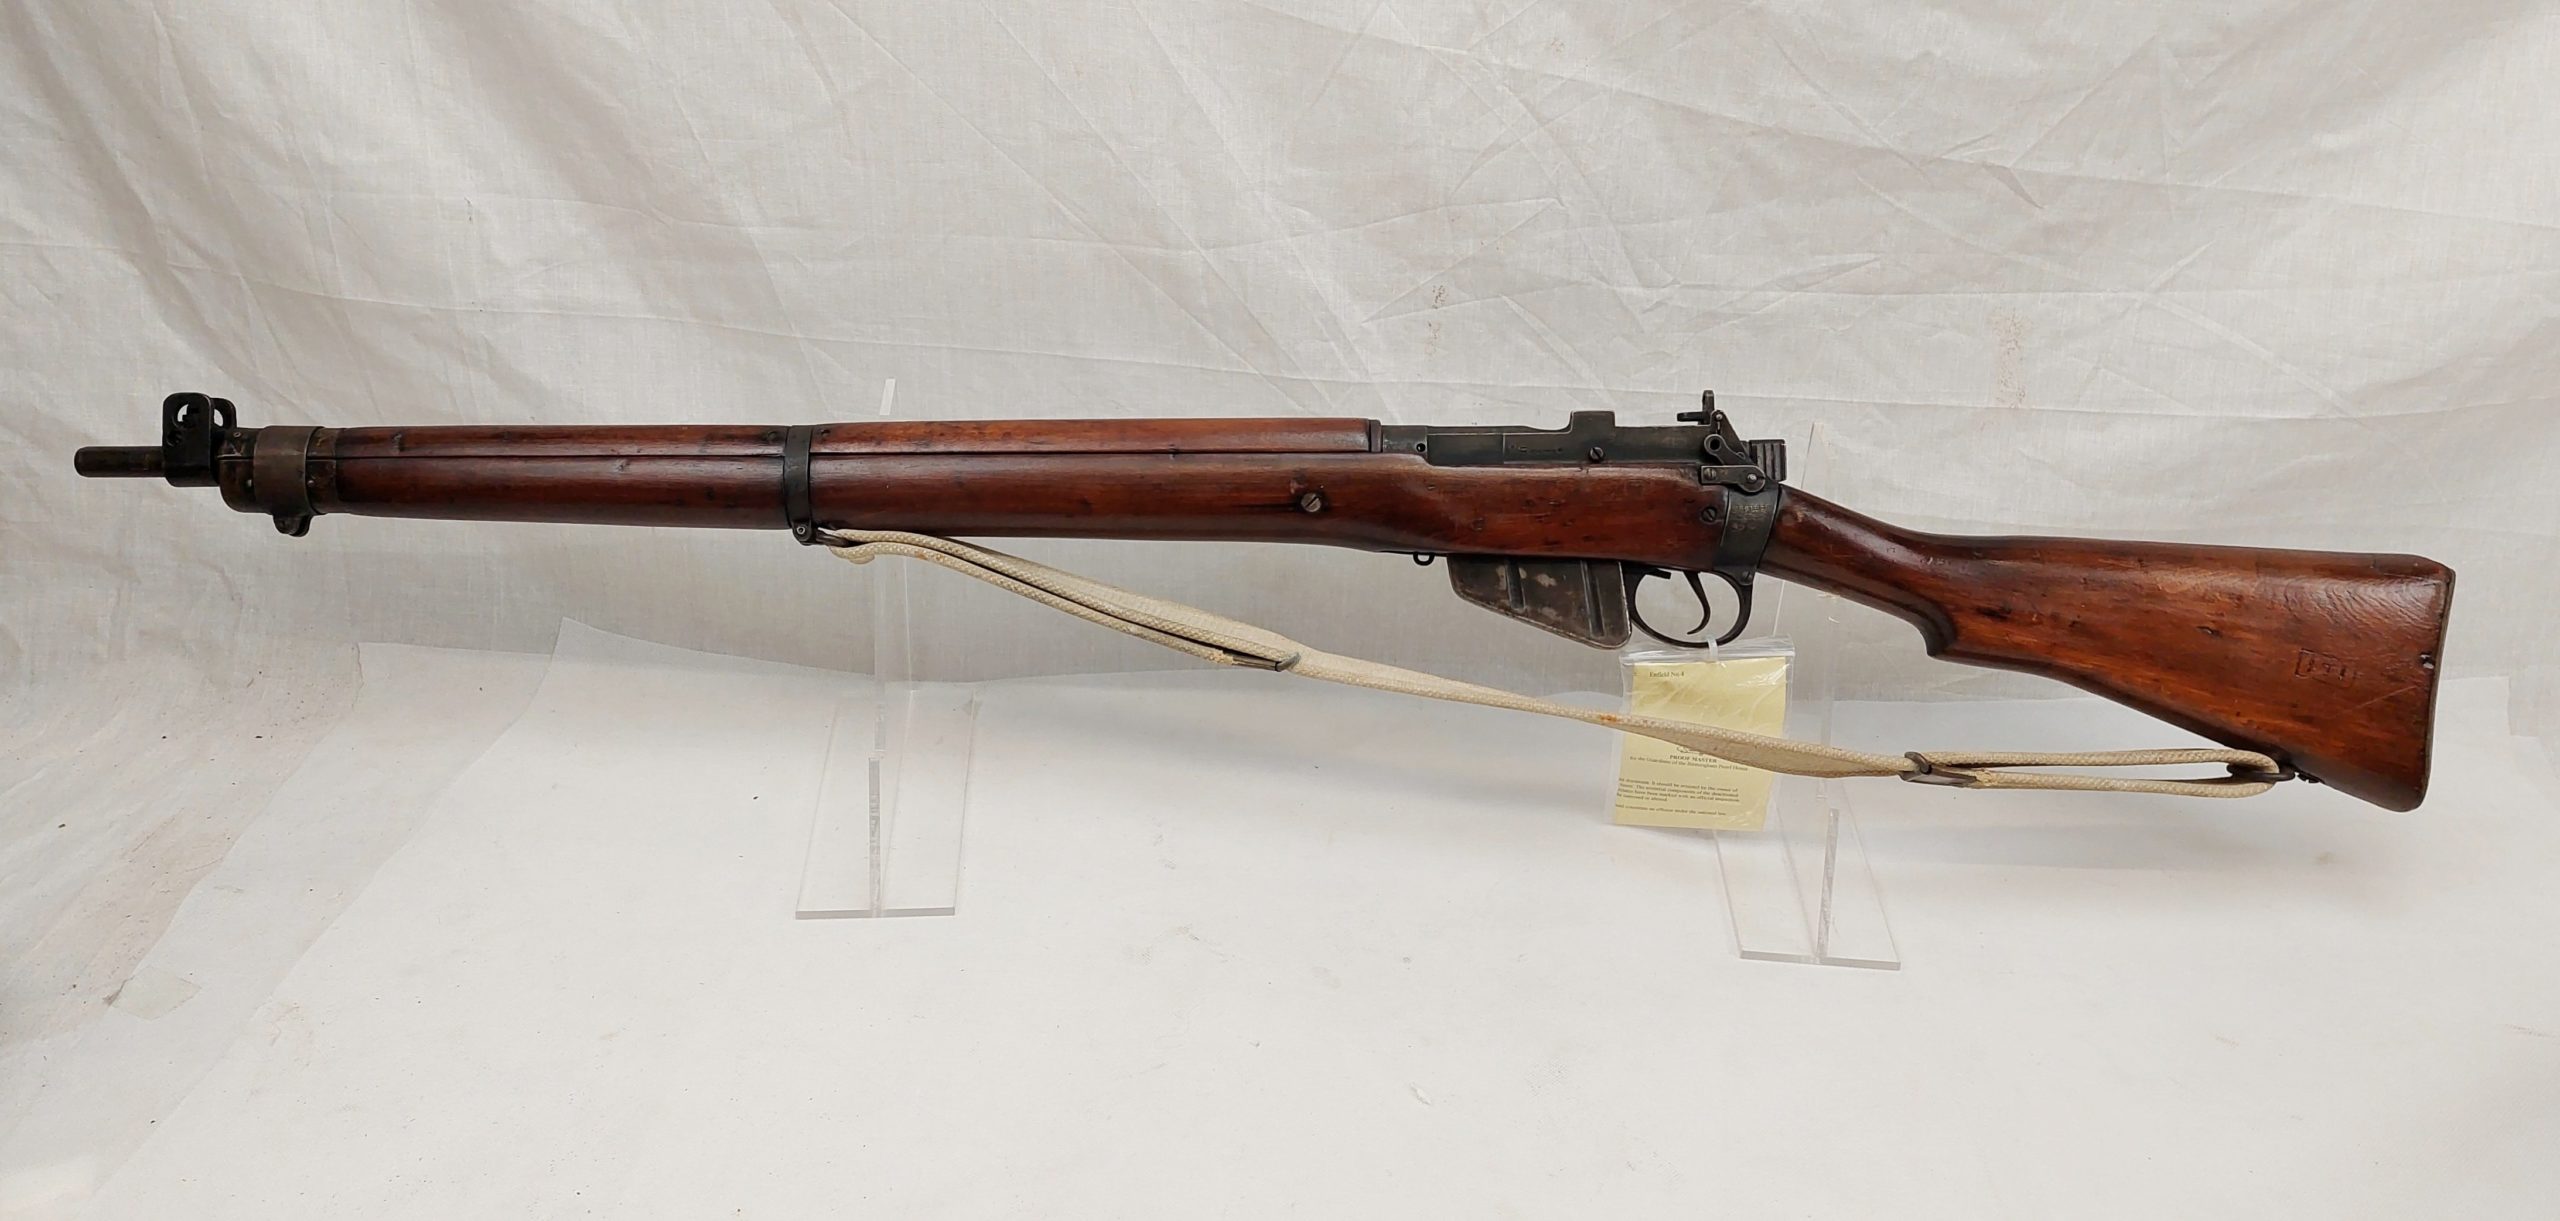 Deactivated Lee-Enfield rifle no4 mk1 British made 1944 dated early spec  SOLD